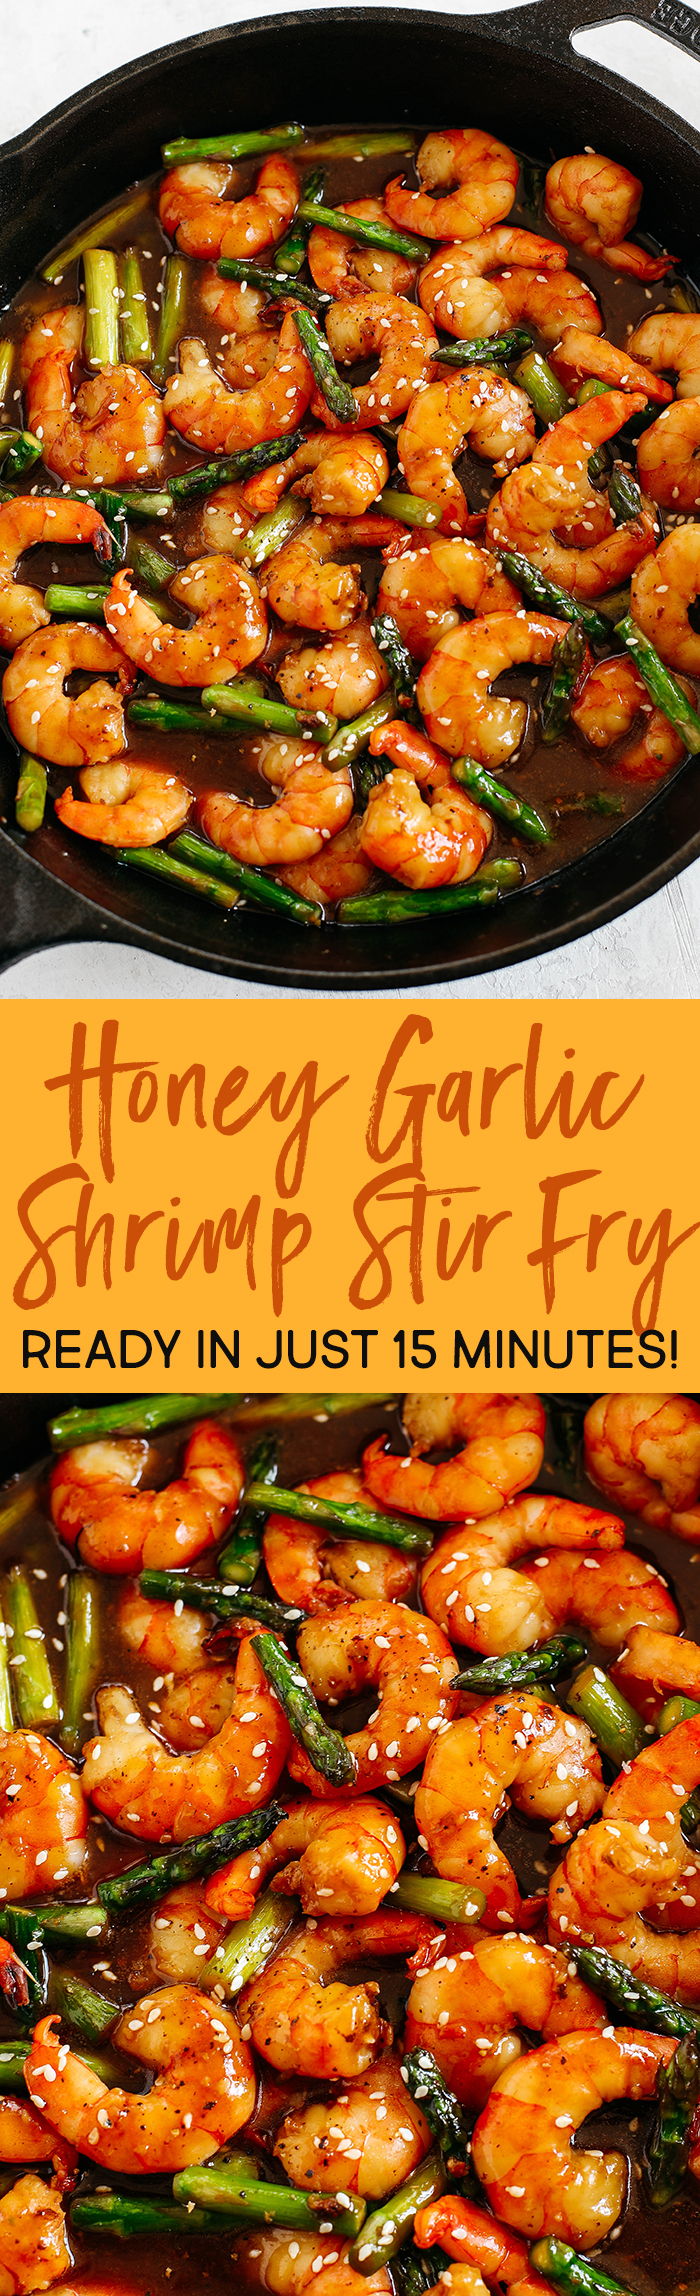 This EASY 15 minute Honey Garlic Shrimp Stir Fry is the perfect weeknight meal that is healthy, flavorful and easily made all in one pan!